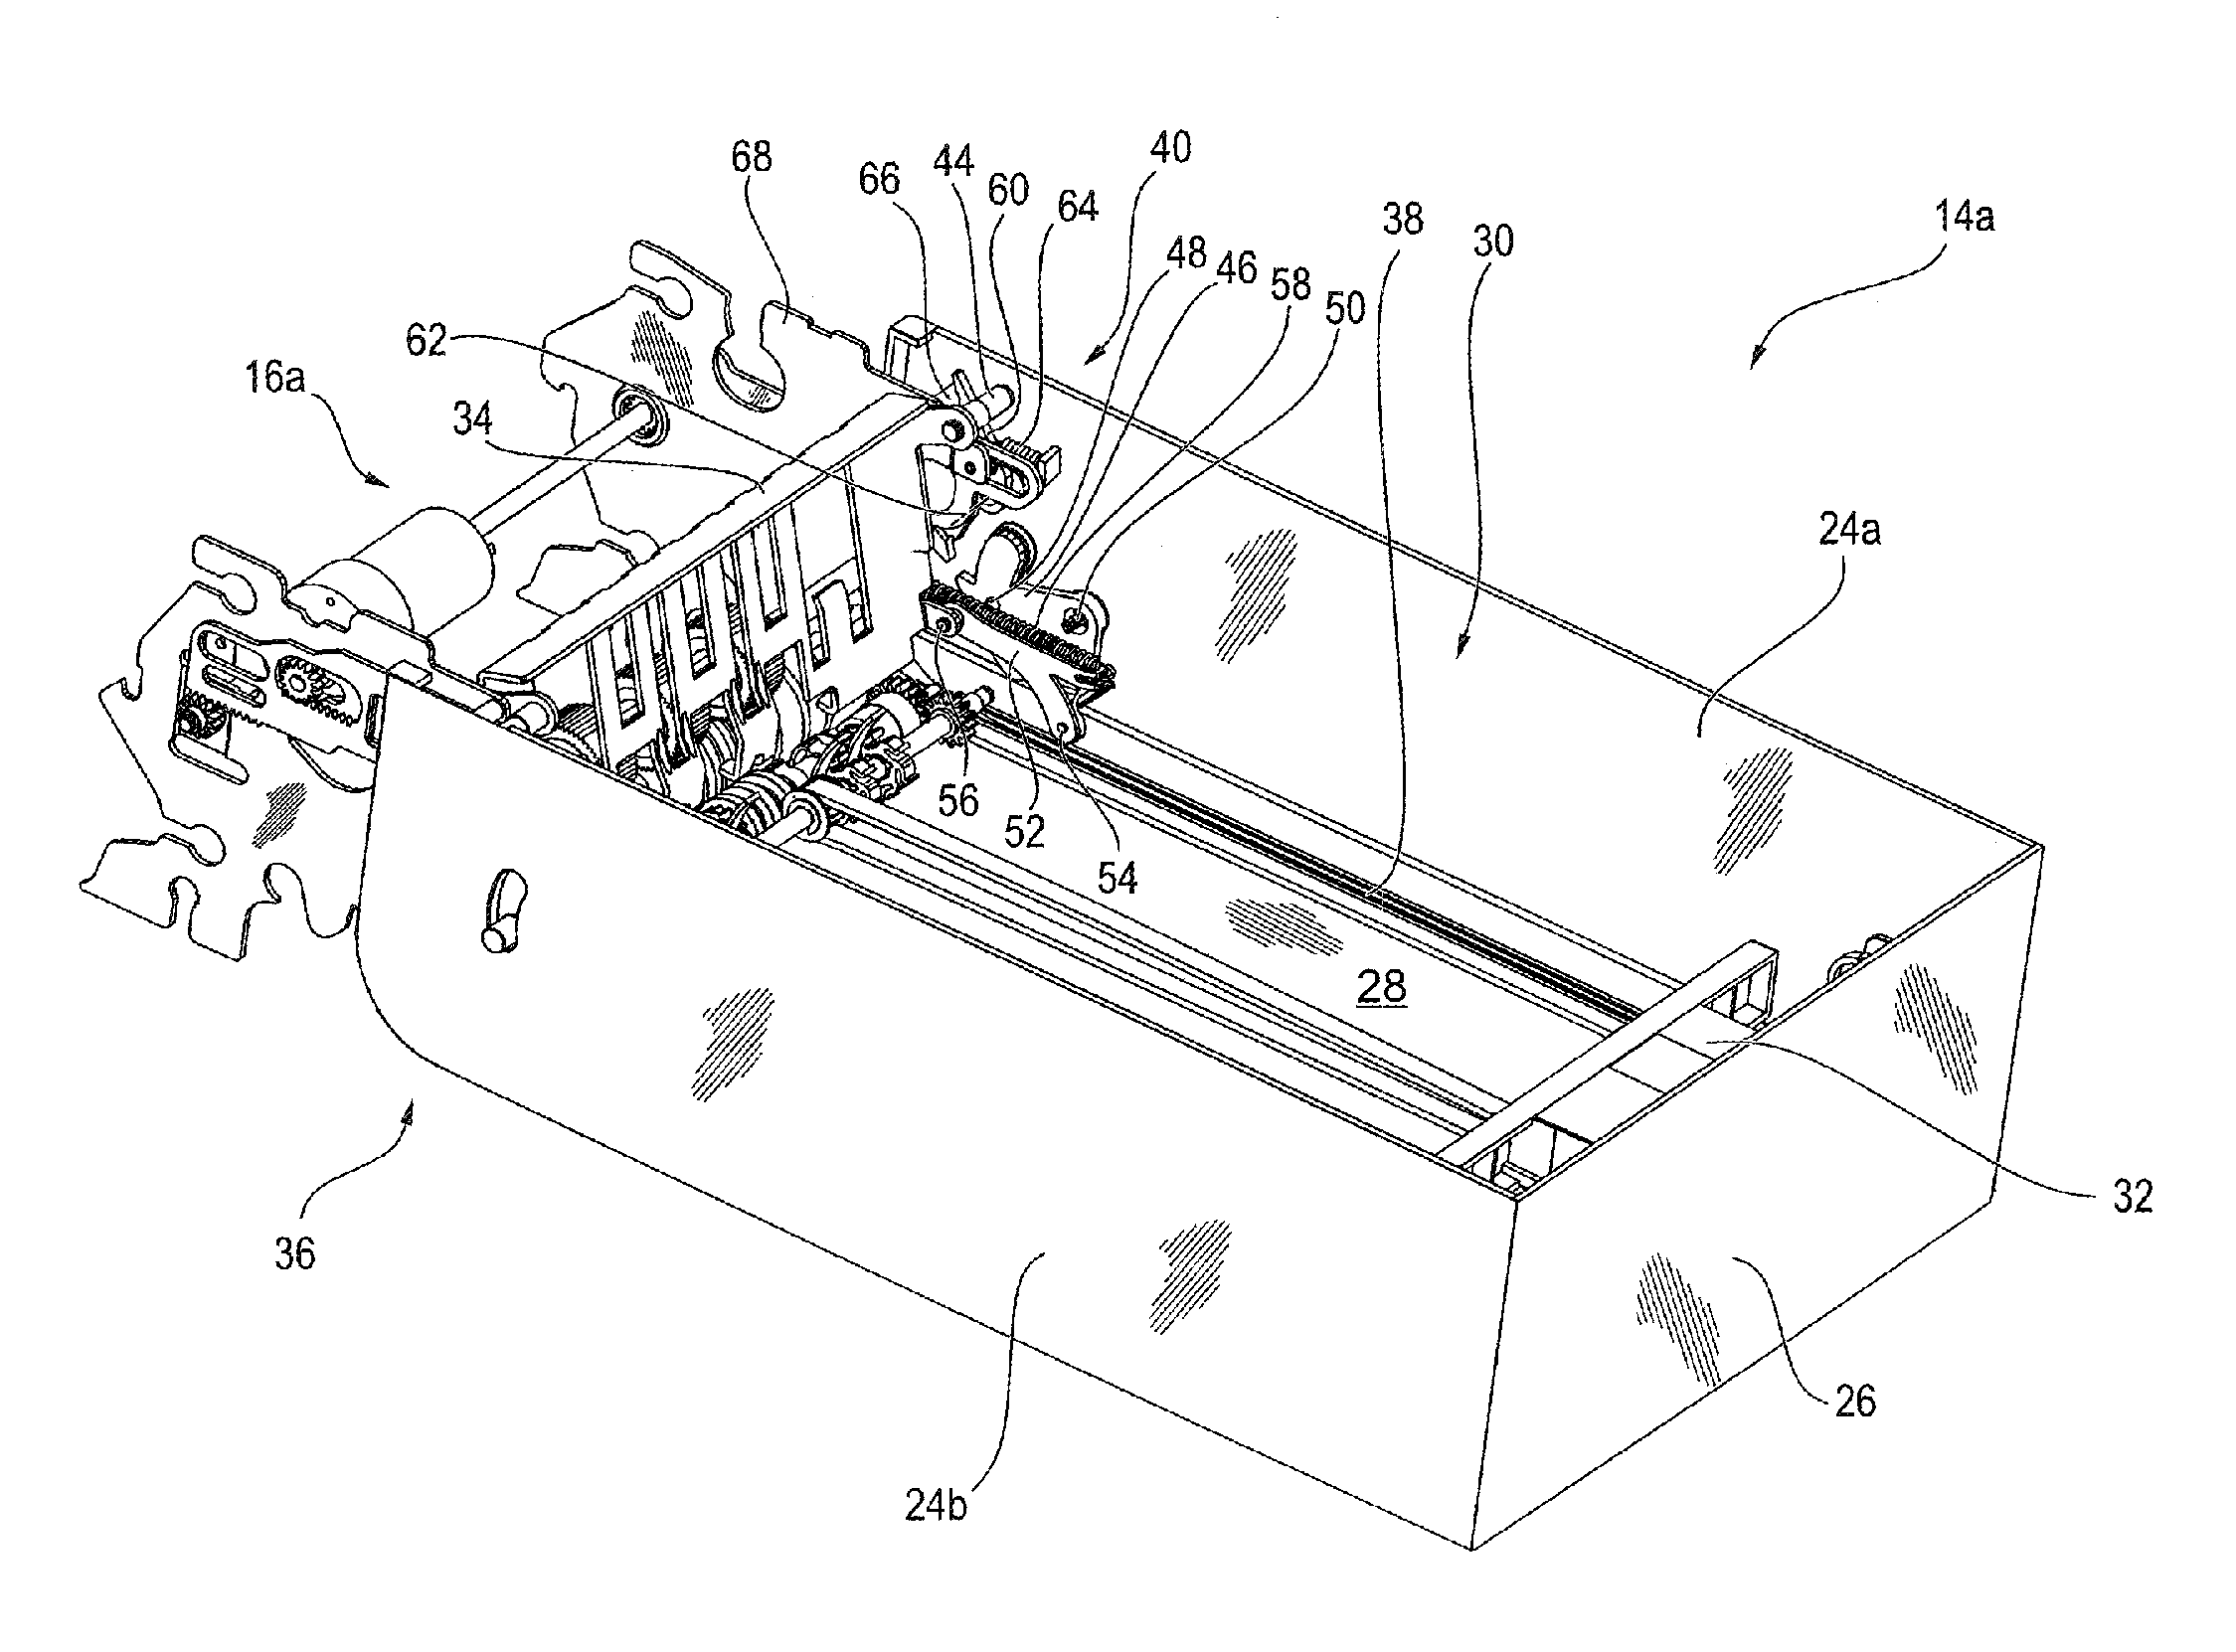 Device for handling banknotes